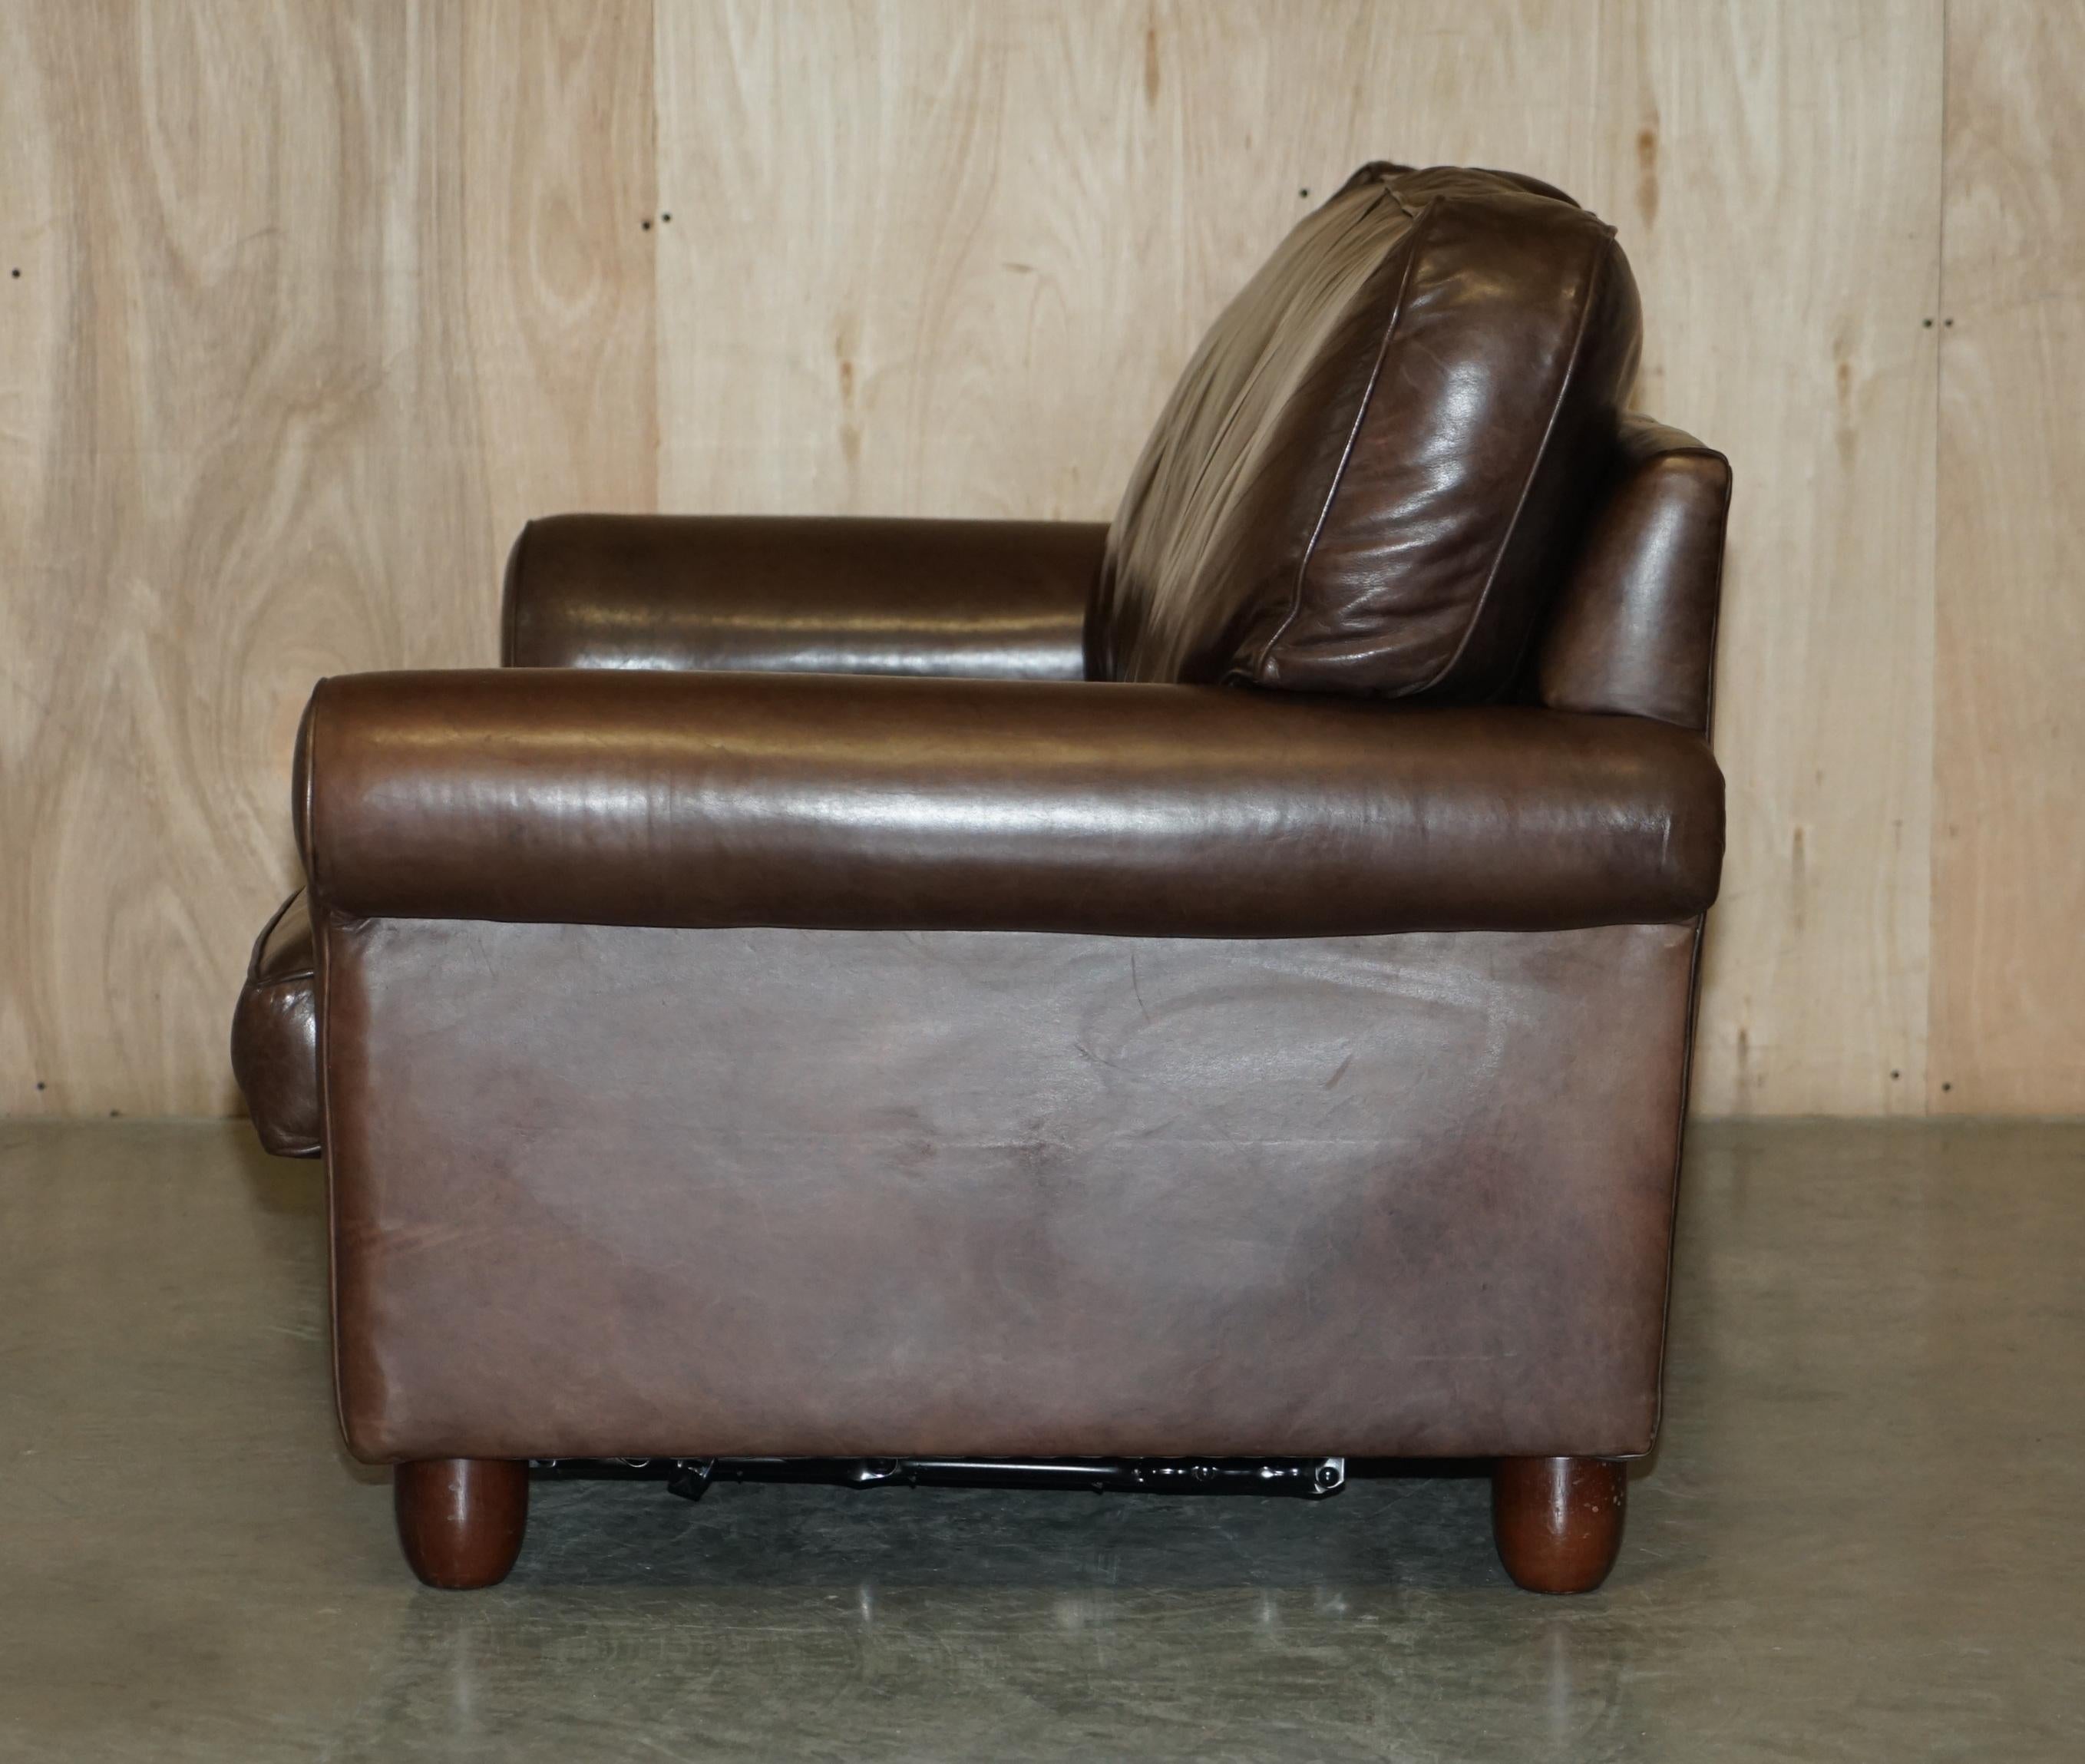 LOVELY HERITAGE BROWN LEATHER LAURA ASHLEY MORTIMER SOFABED IN SEHR GUTEM ZUSTAND im Angebot 6